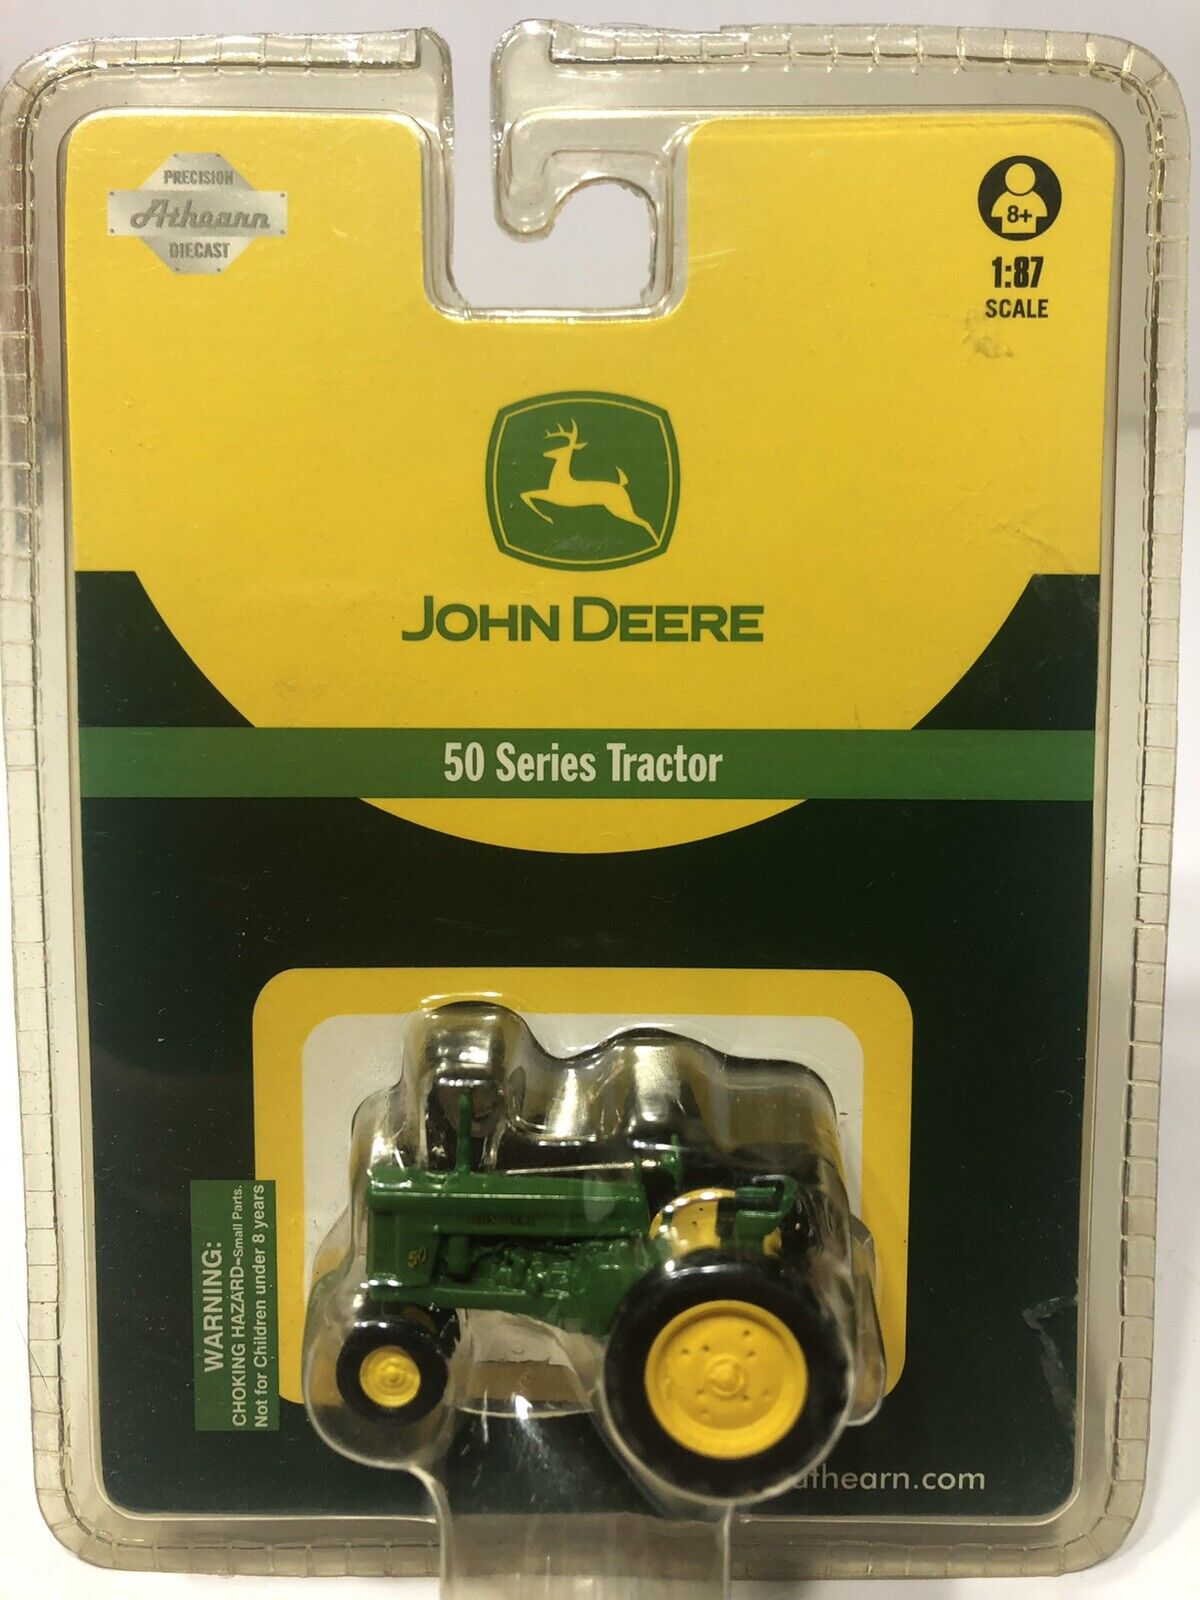 Athearn Ho Scale 1/87 John Deere 50 Series Tractor  #7701 New In Package